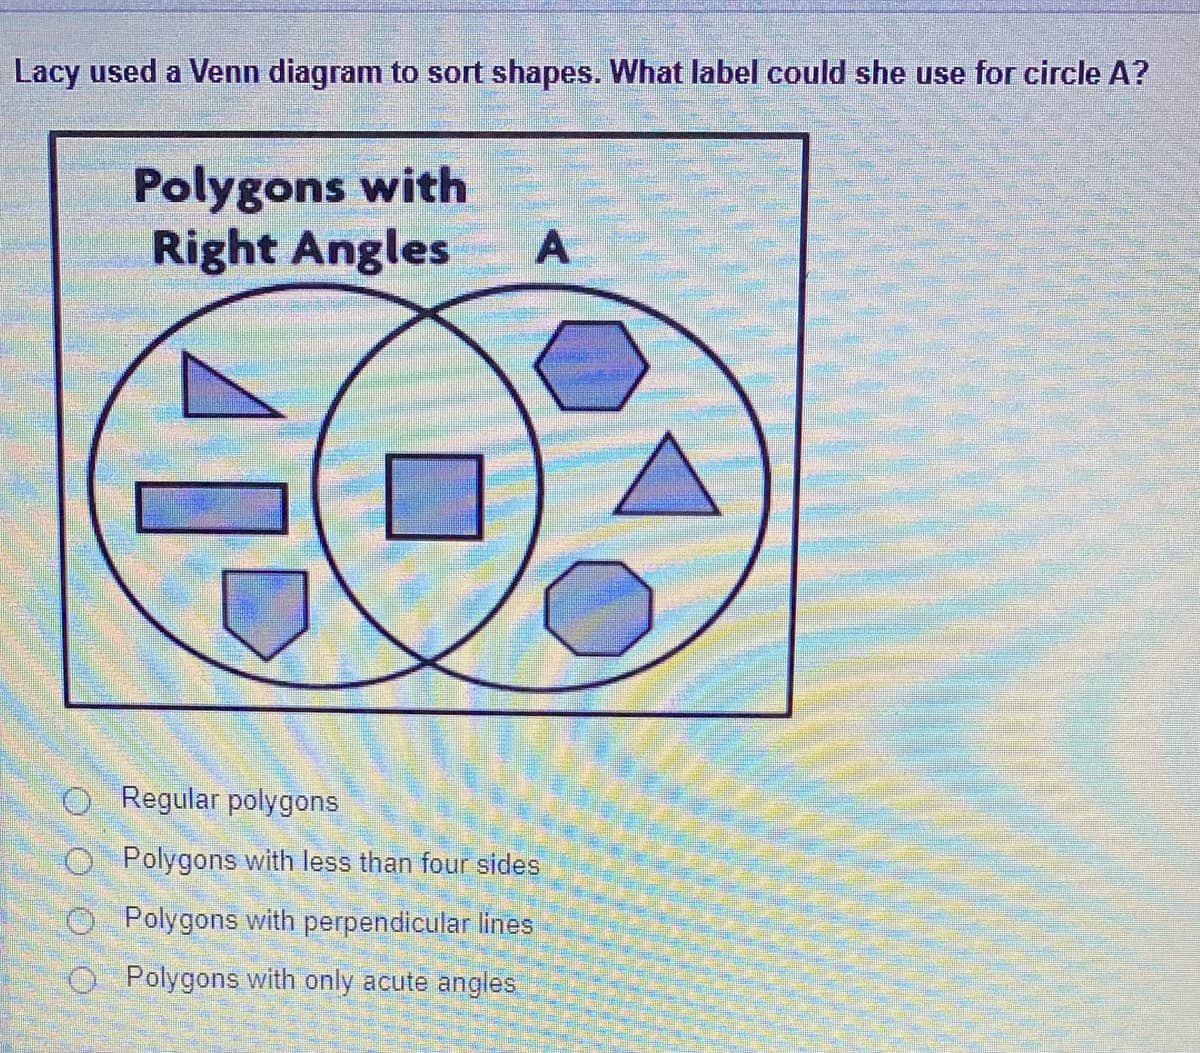 Lacy used a Venn diagram to sort shapes. What label could she use for circle A?
Polygons with
Right Angles
Regular polygons
Polygons with less than four sides
Polygons with perpendicular lines
O Polygons with only acute angles
